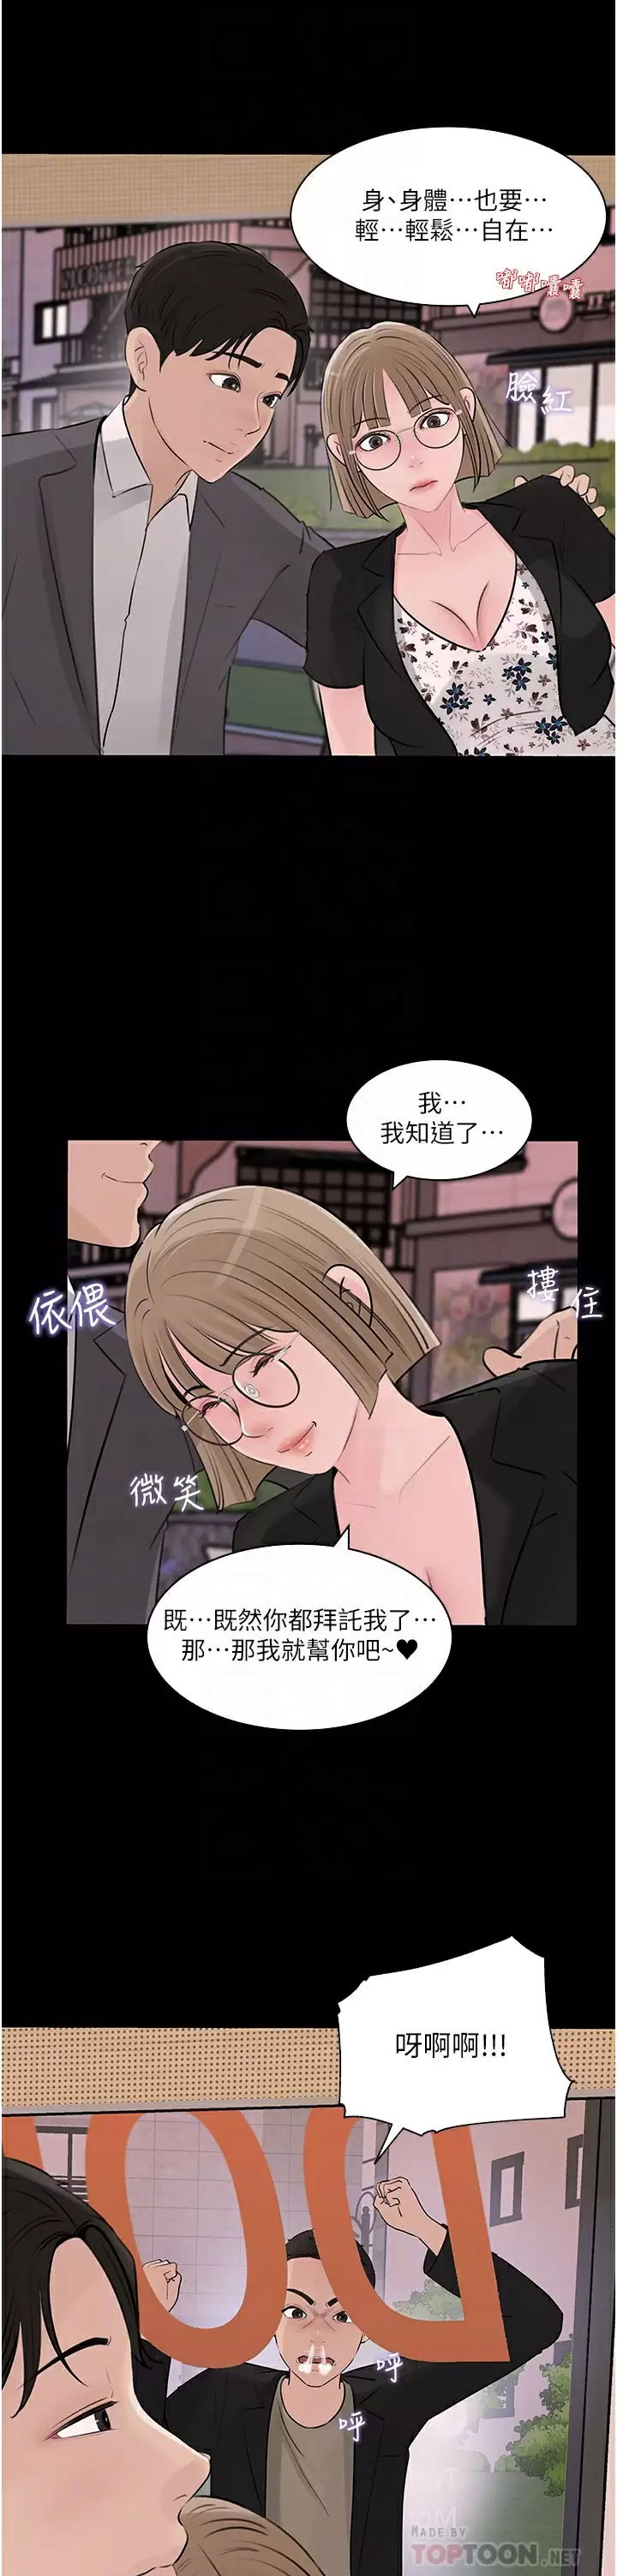 in-my-sister-in-law-raw-chap-32-7